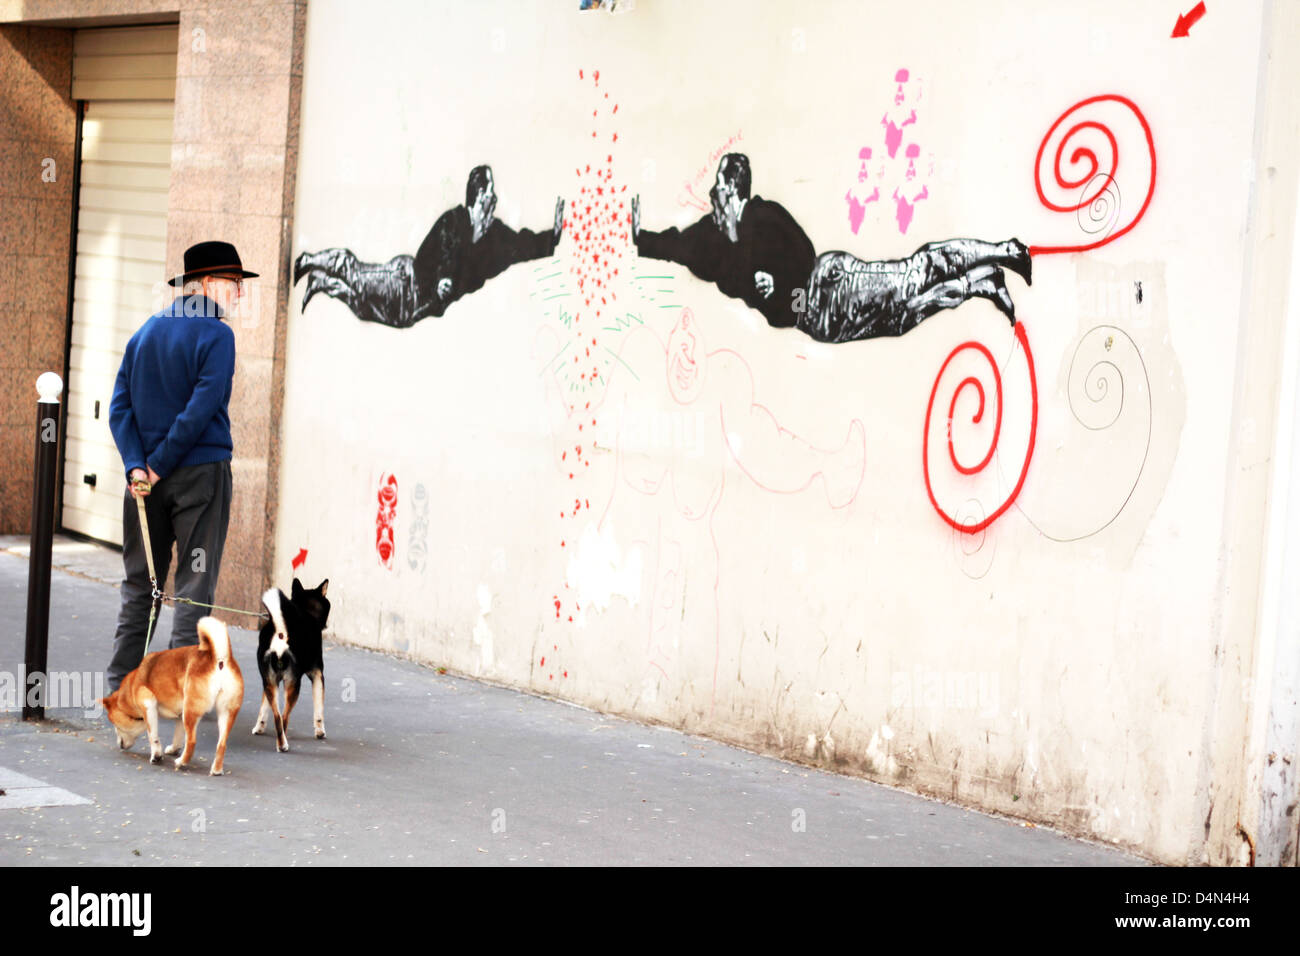 Senior man walking his two dogs stops to watch a wall graffiti, Paris, France Stock Photo